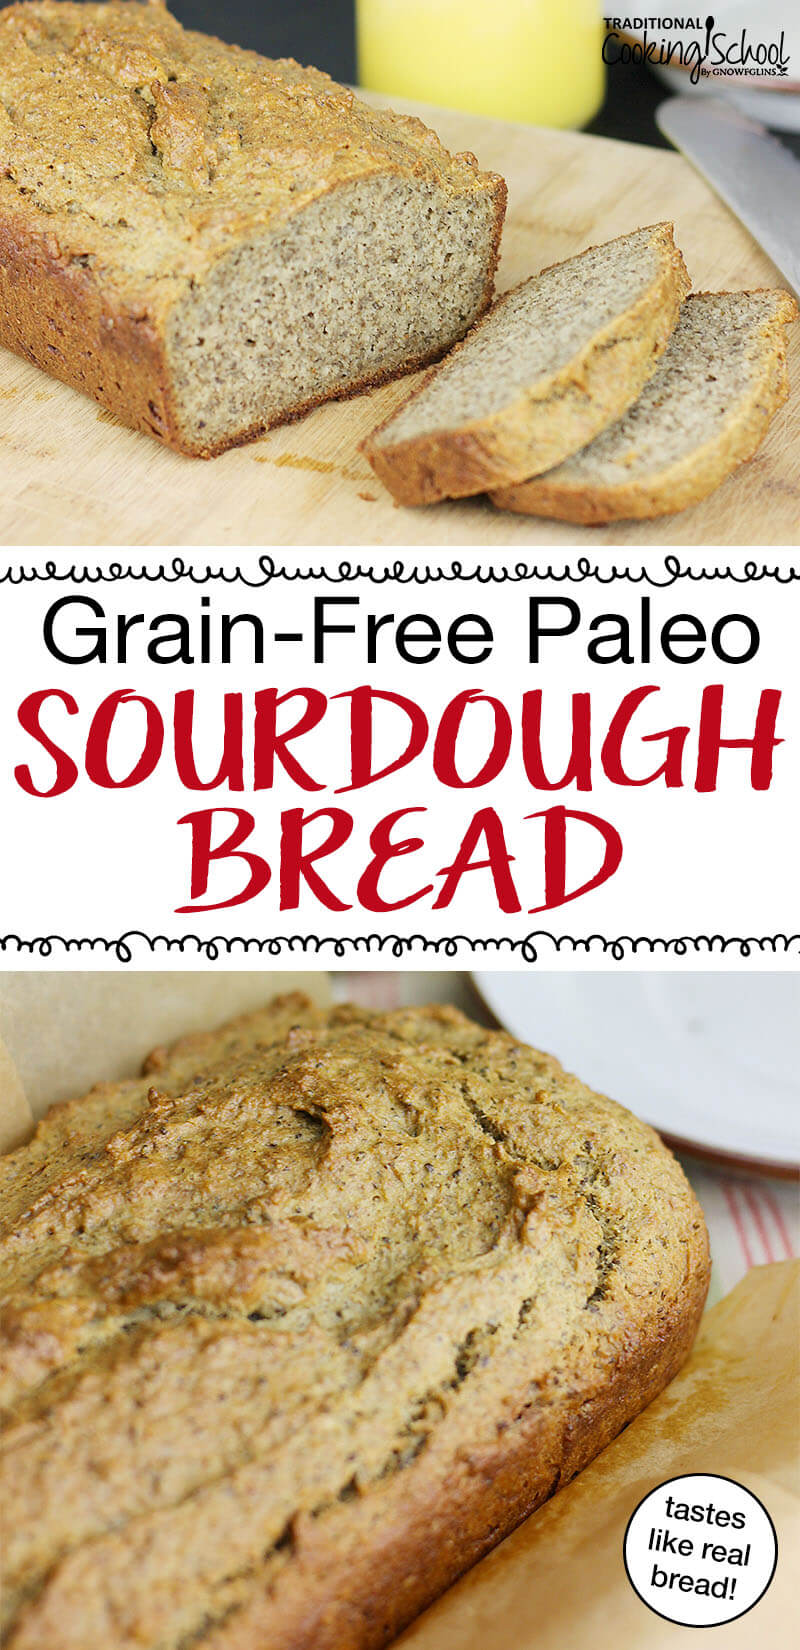 Grain-Free Paleo Sourdough Bread | How do you make grain-free baked goods? I use soaked nuts. Grain-free sourdough bread recipes may be hard to find, but this one is a versatile gem that can be made into loaves or rolls and eaten as sandwiches or toast! It tastes just like tender, soft, fresh, whole wheat bread! | TraditionalCookingSchool.com